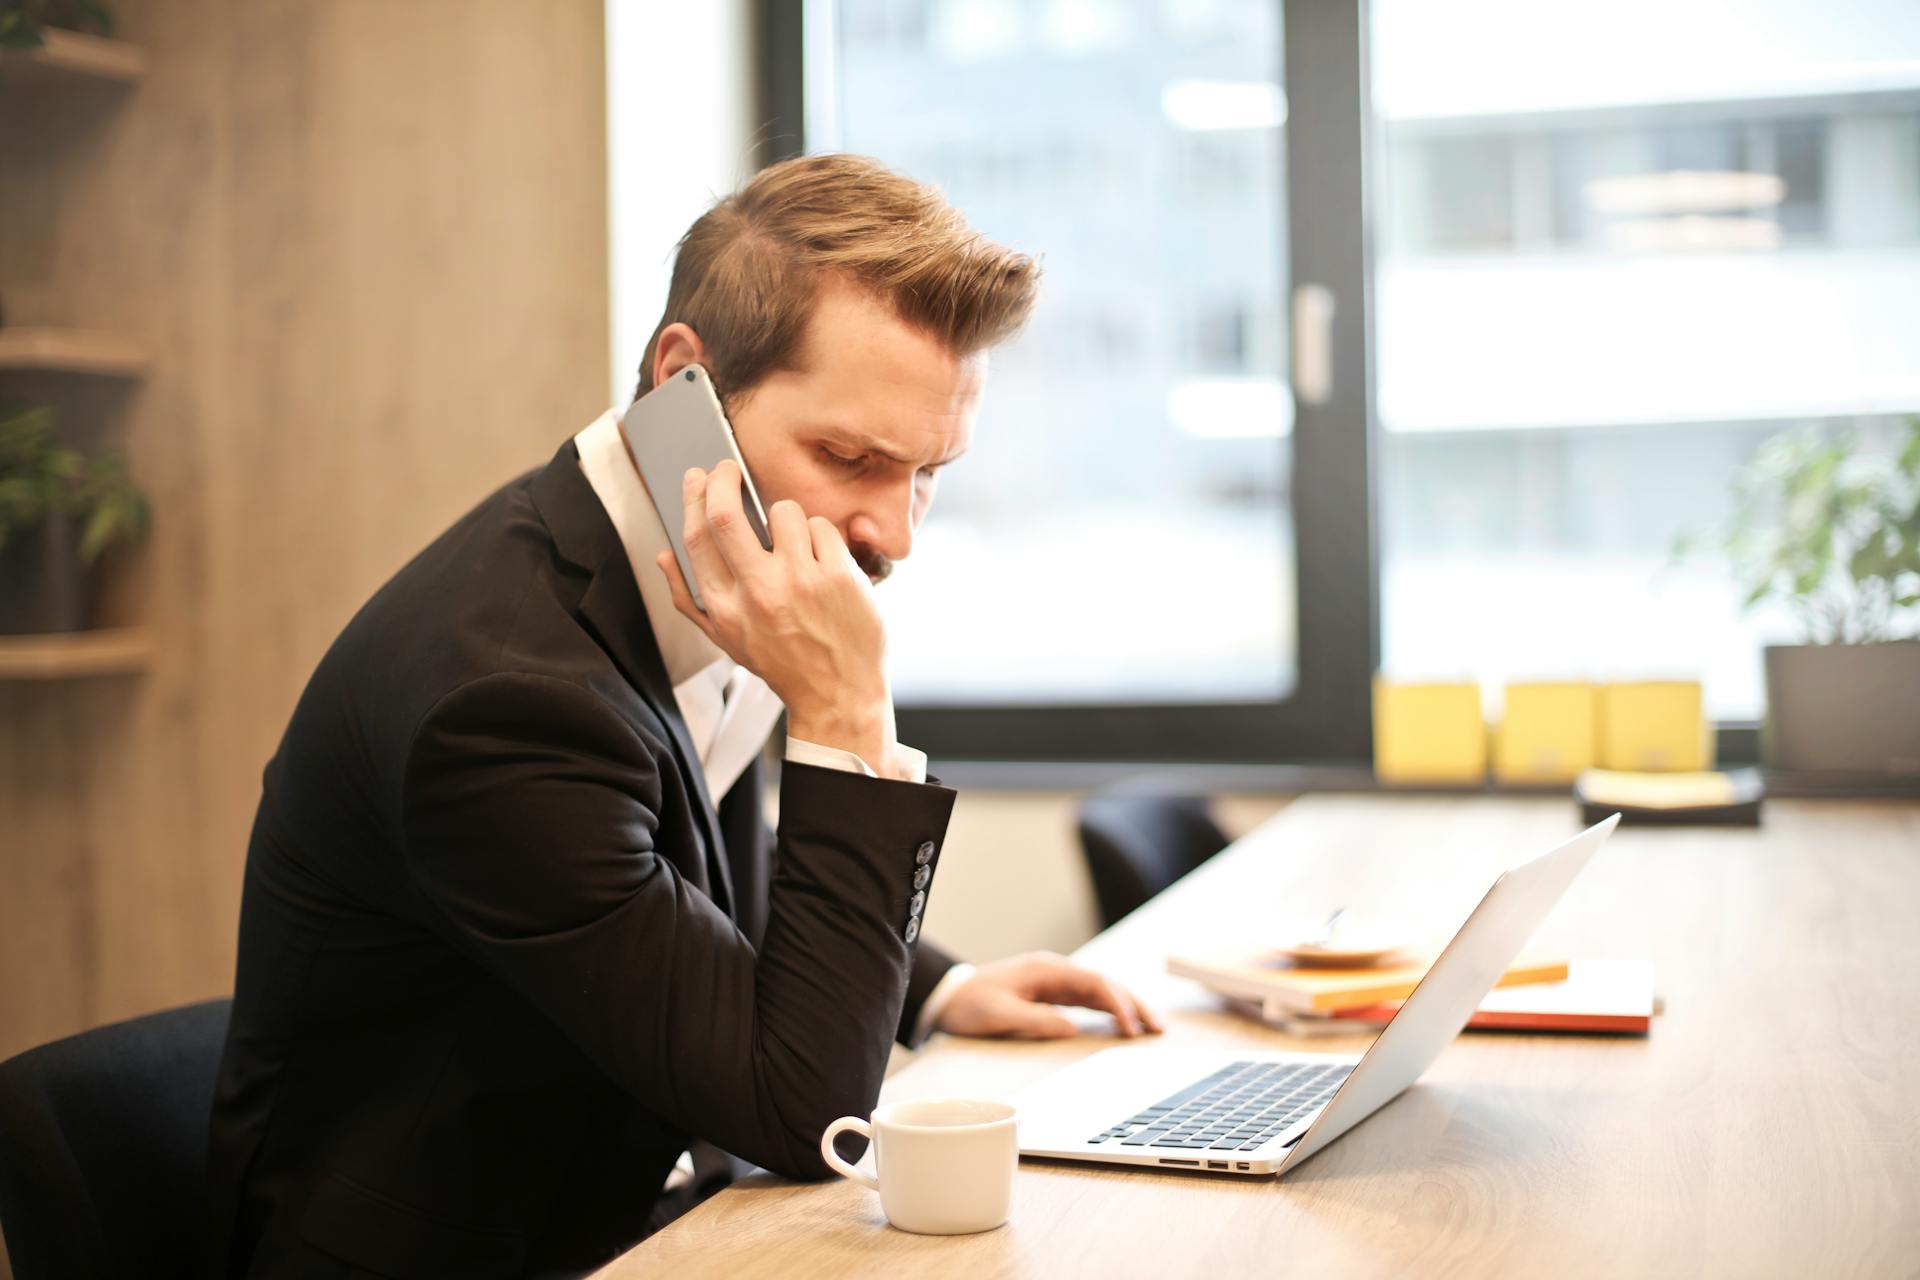 A man speaking on the phone | Source: Pexels